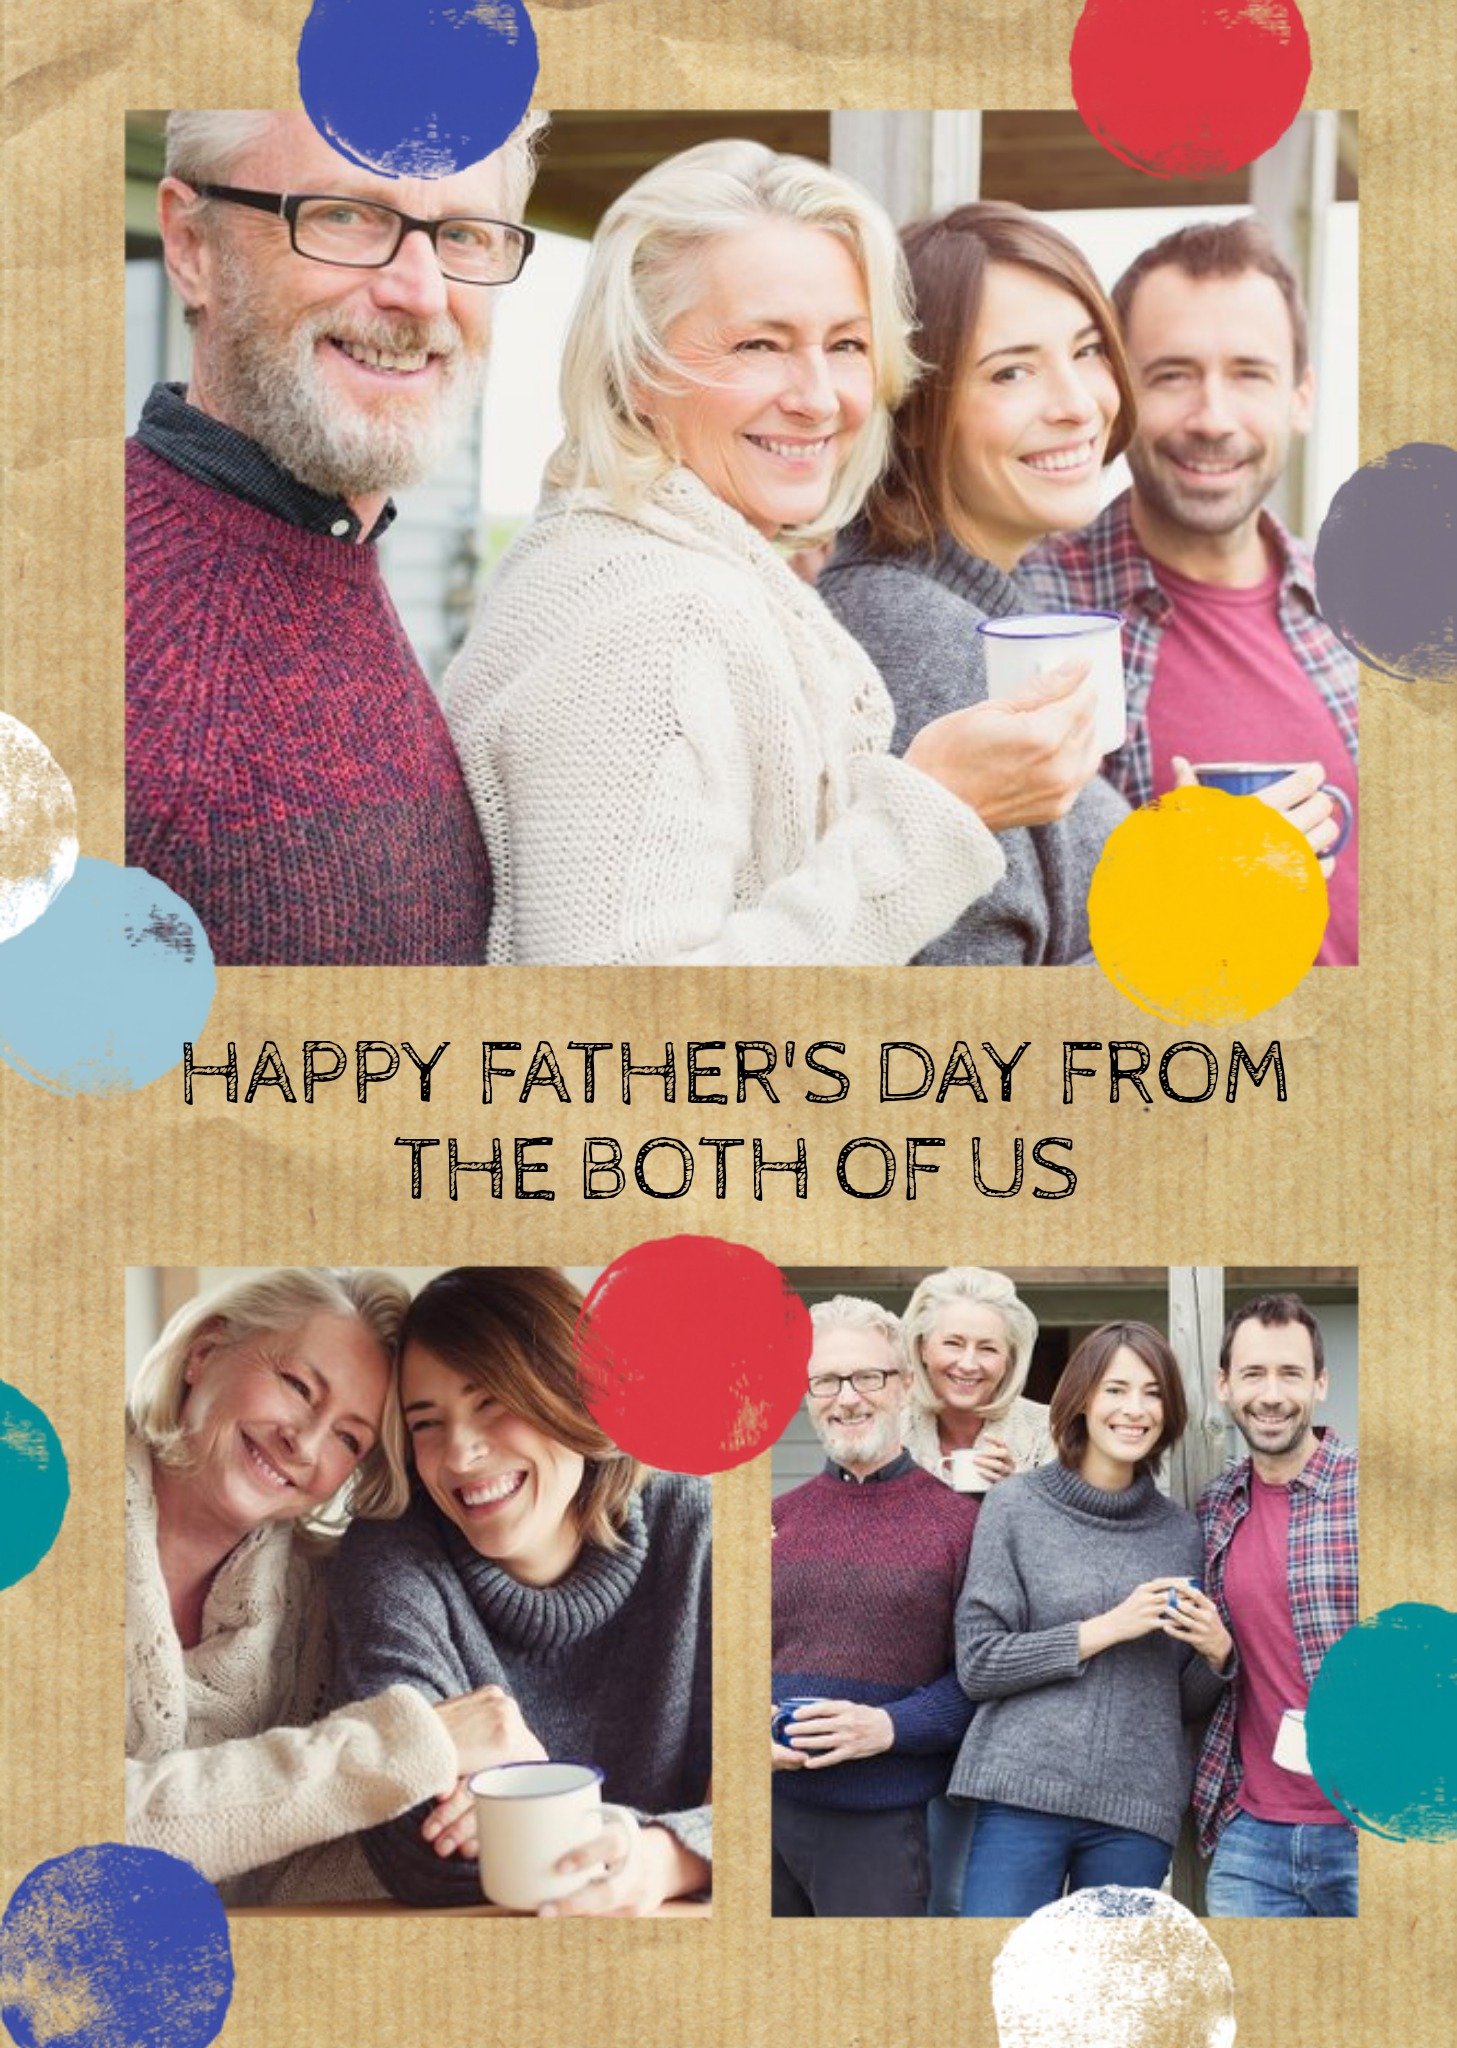 Moonpig Colourful Polka Dots Happy Fathers Day From The Both Of Us Photo Card Ecard